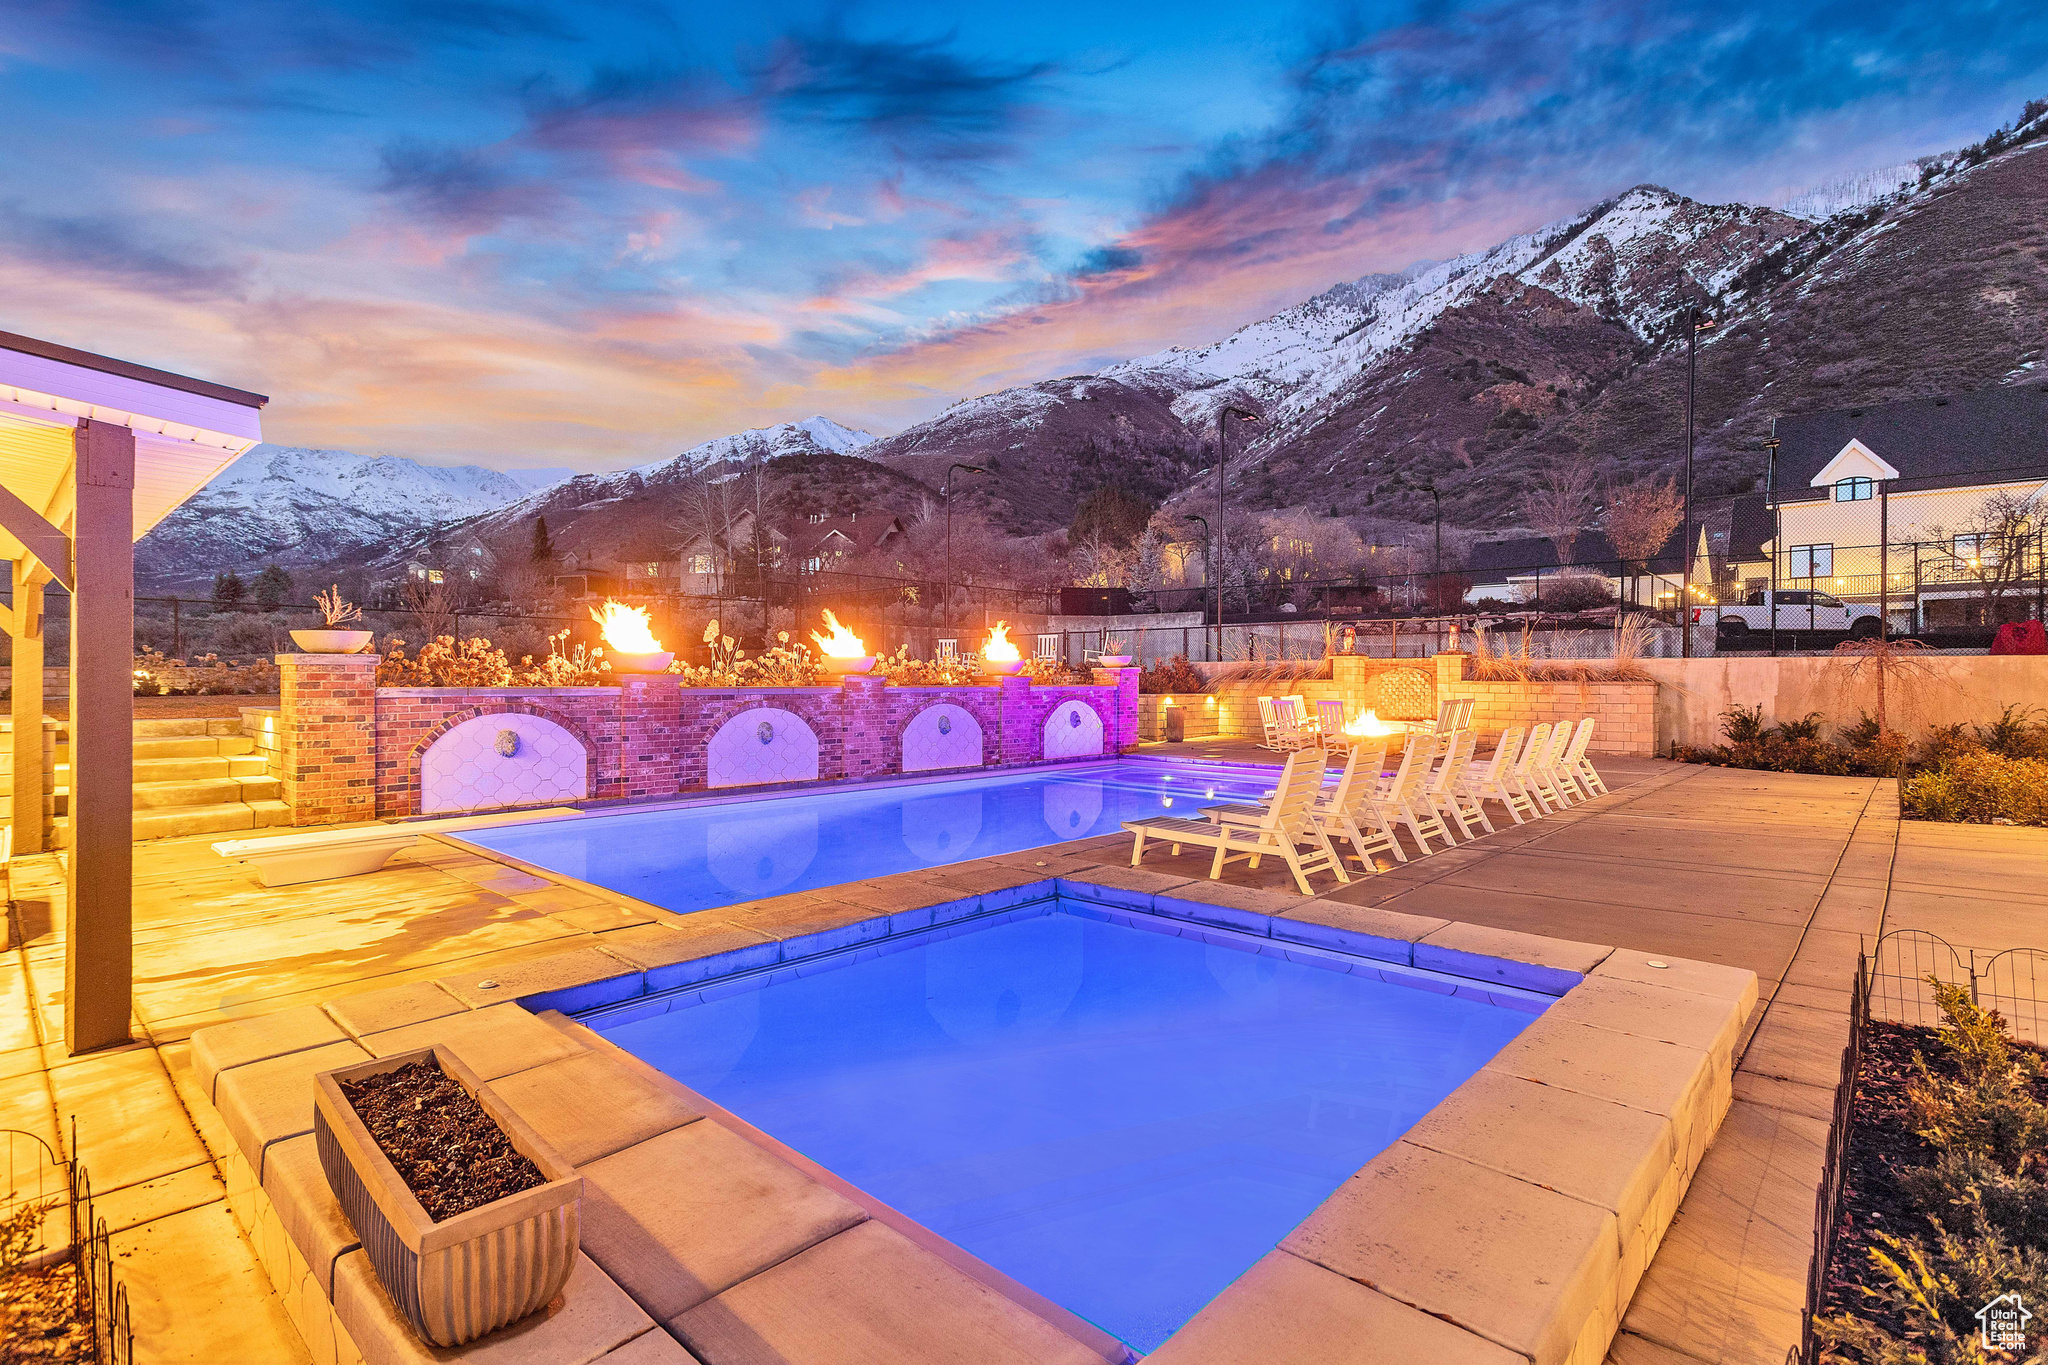 Pool at dusk with a patio area and a mountain view